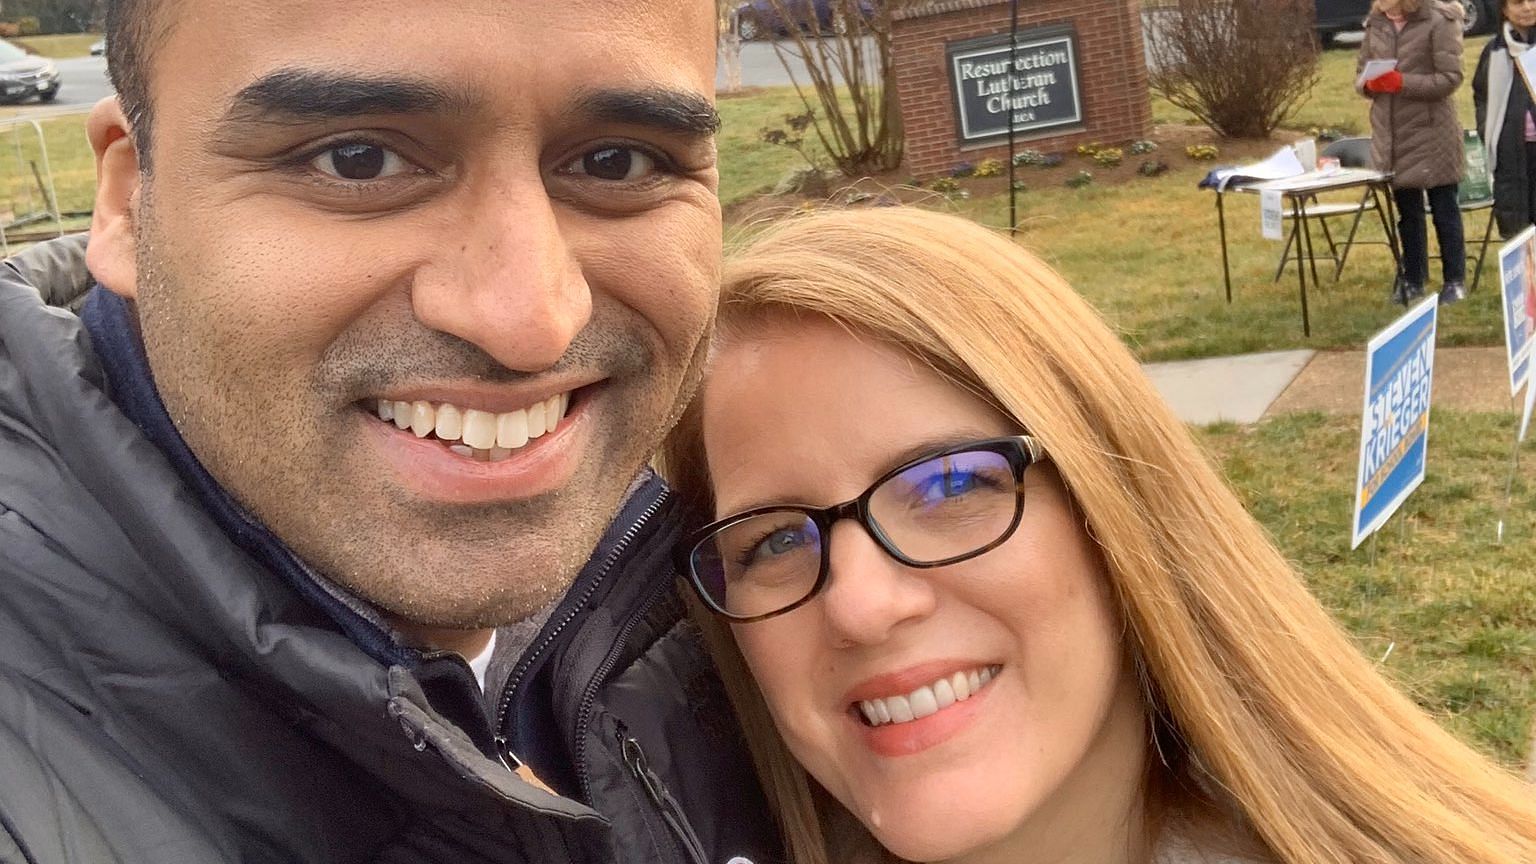 Maju Varghese with his wife Julie, after casting their votes in the Democratic Party primary in Virginia, in March 2020.